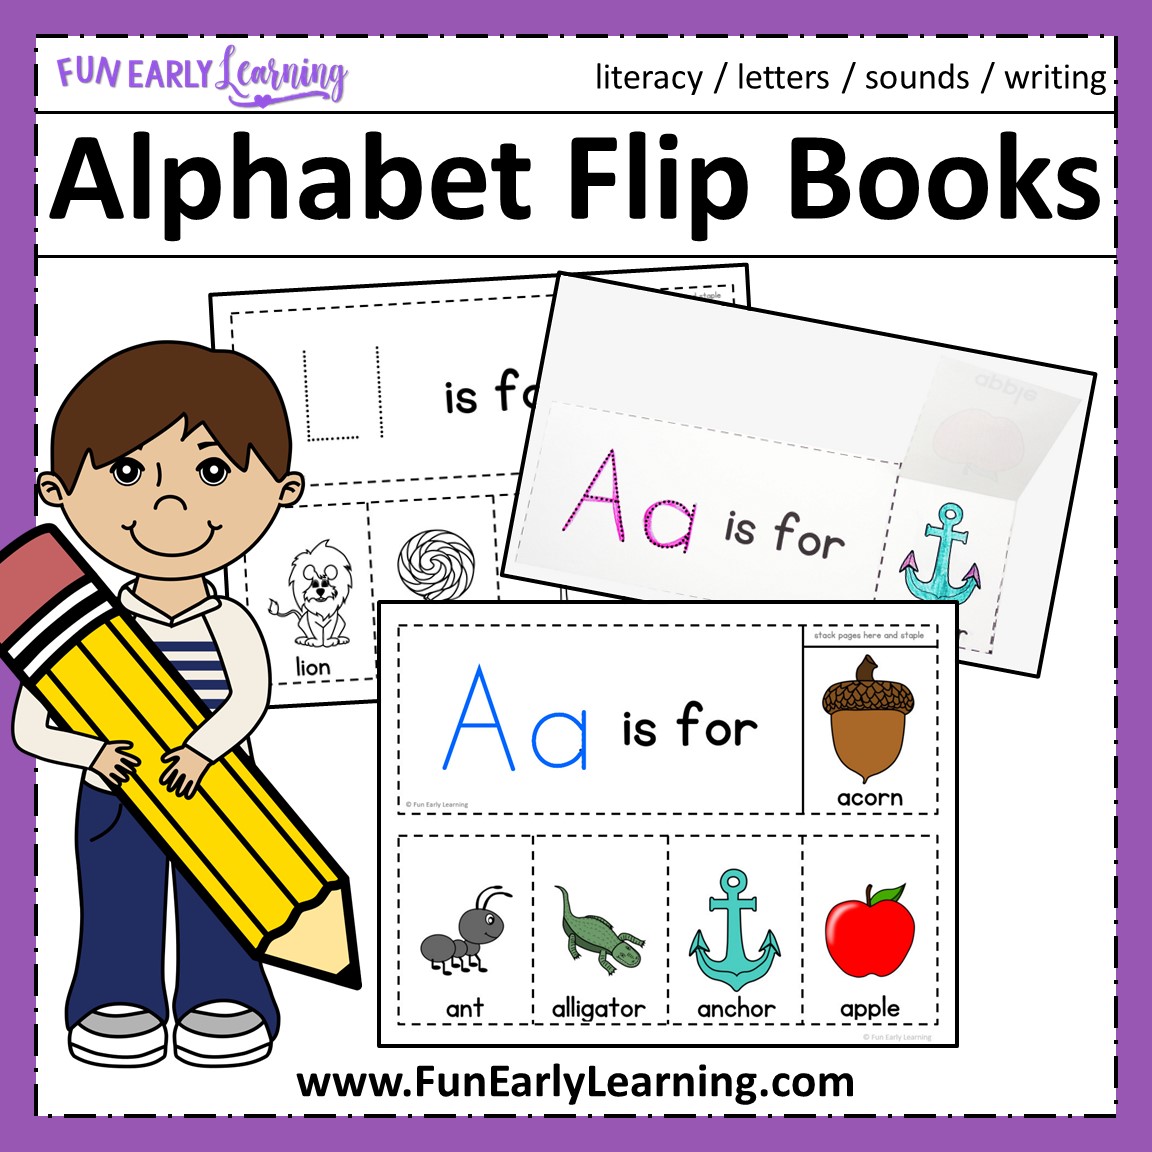 Alphabet Books: Flip Books to Teach Letters and Sounds